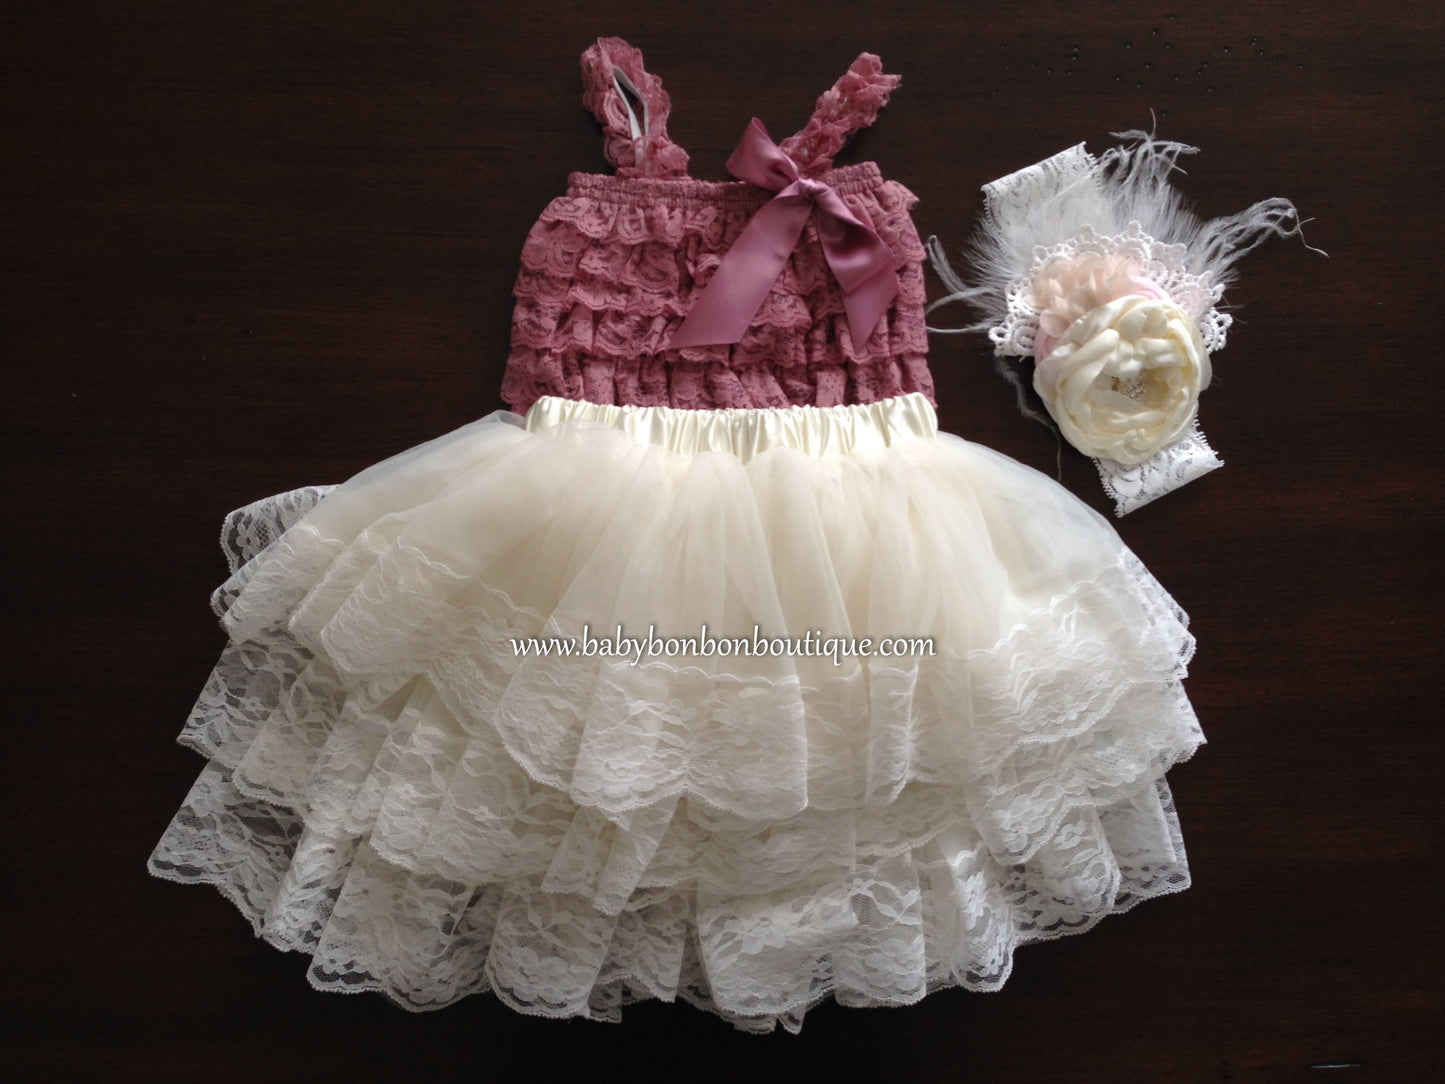 Lace Romper and Fluffy Lace Skirt with Headband